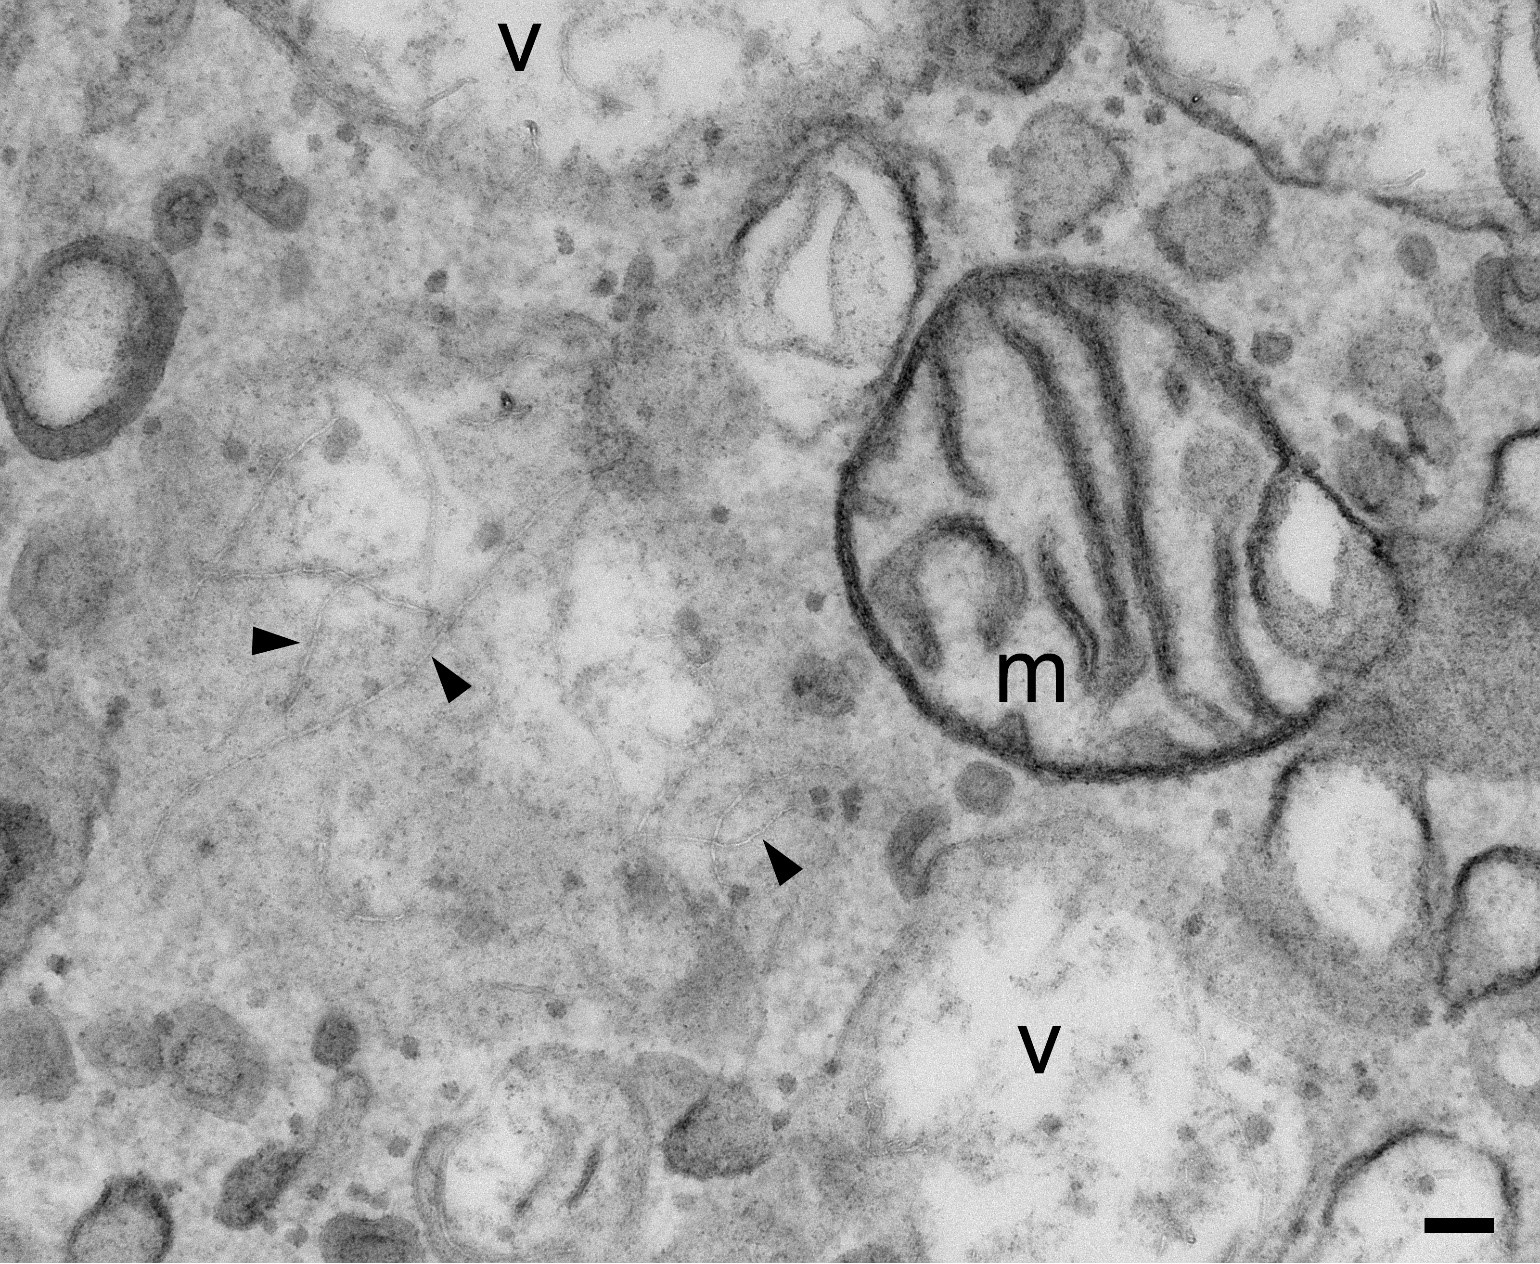 Uptake of multi-walled carbon nanotubes by human macrophages in culture; arrowheads indicate MWCNTs, m = mitochondria, v = intracellular vesicles; scale bar is 100 nm (doi: 10.1021/acsbiomaterials.6b00197).